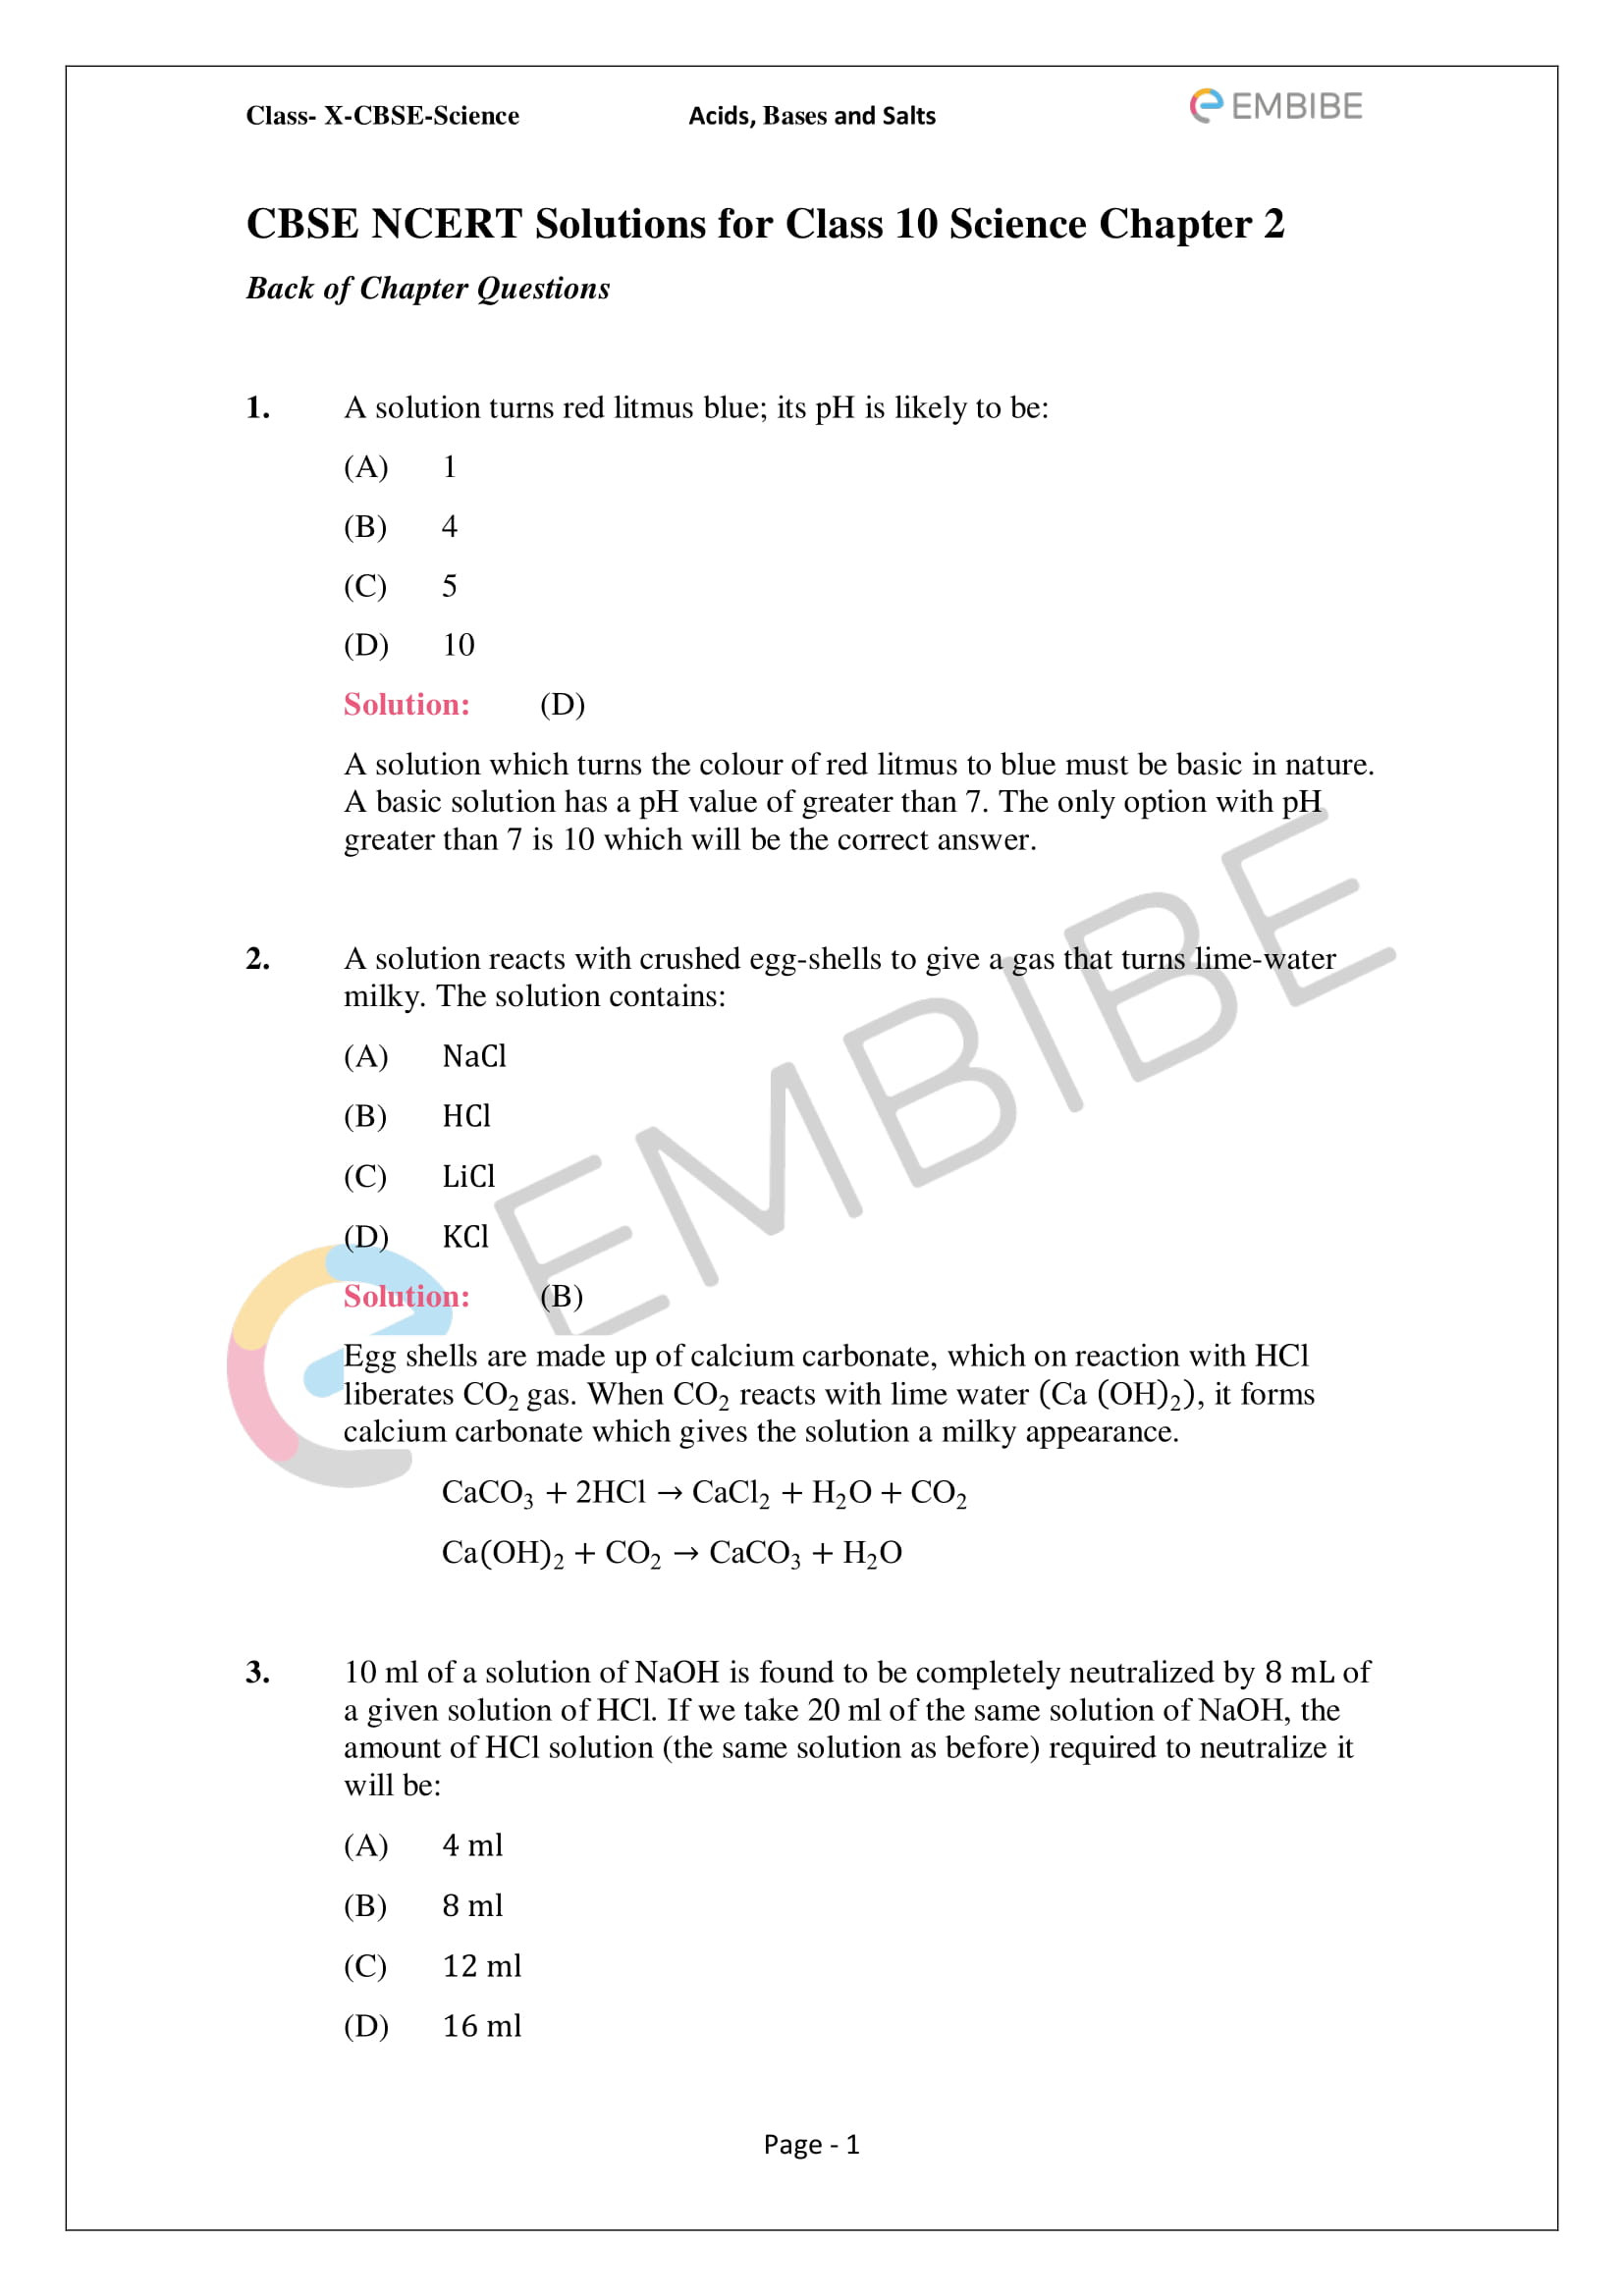 Solutions Acids and Bases Worksheet Ncert solutions for Class 10 Science Chapter 2 Acids Bases